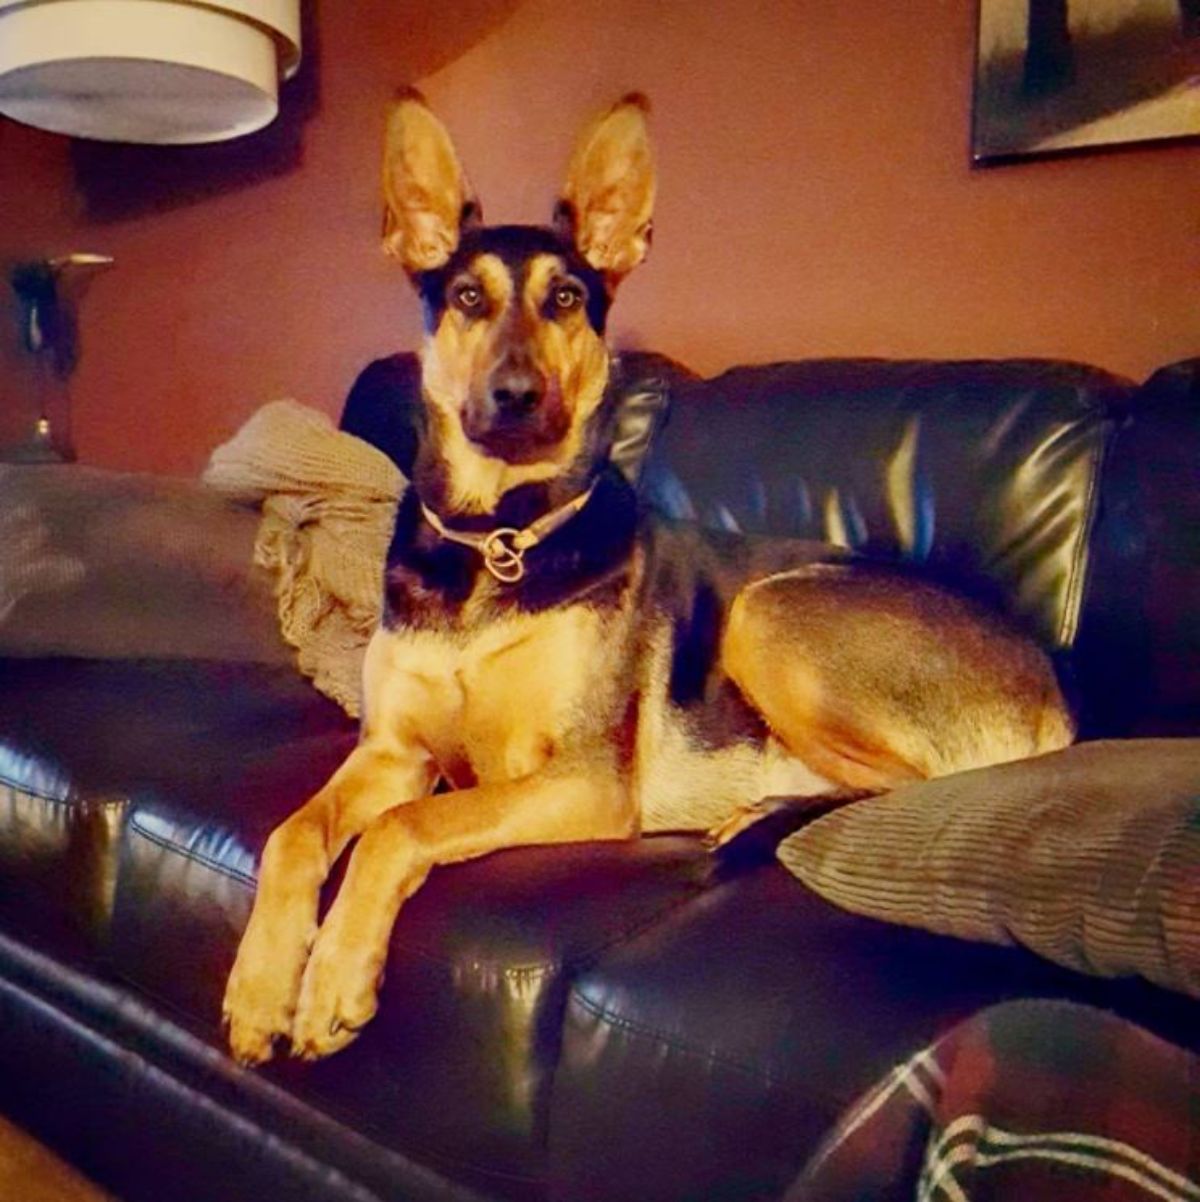 German Shepherd mixed with Doberman sitting on the couch